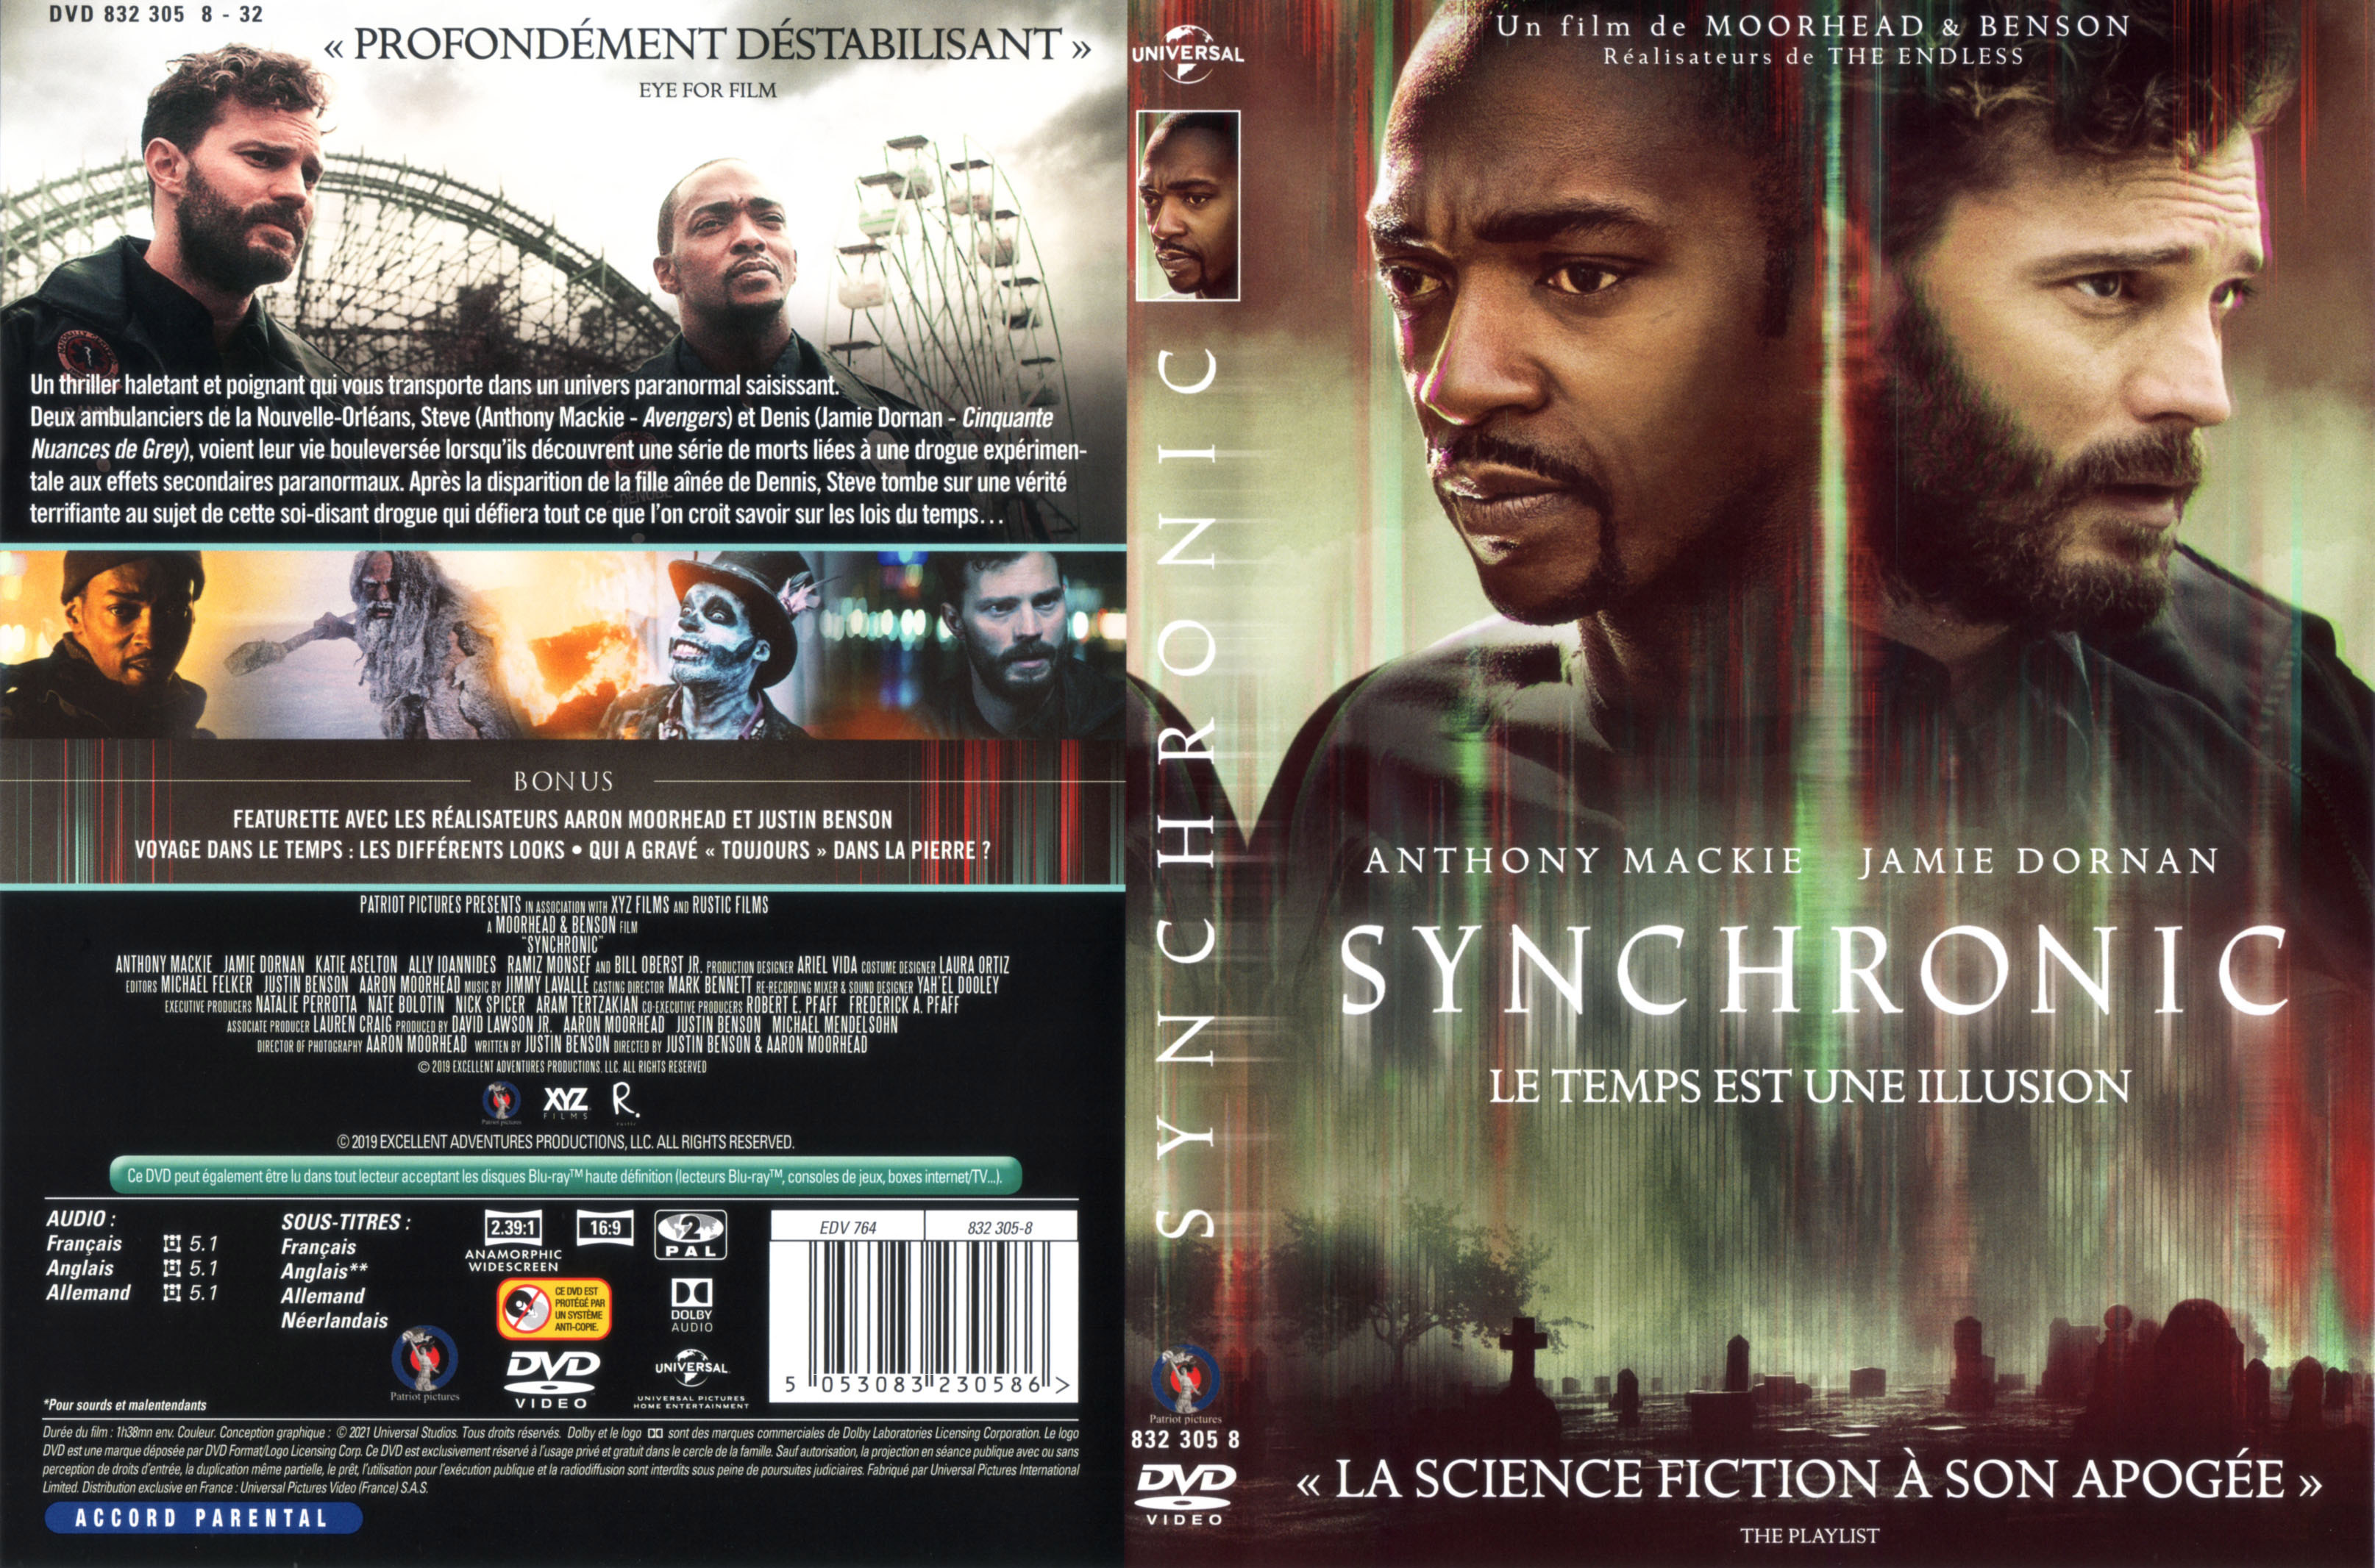 Jaquette DVD Synchronic